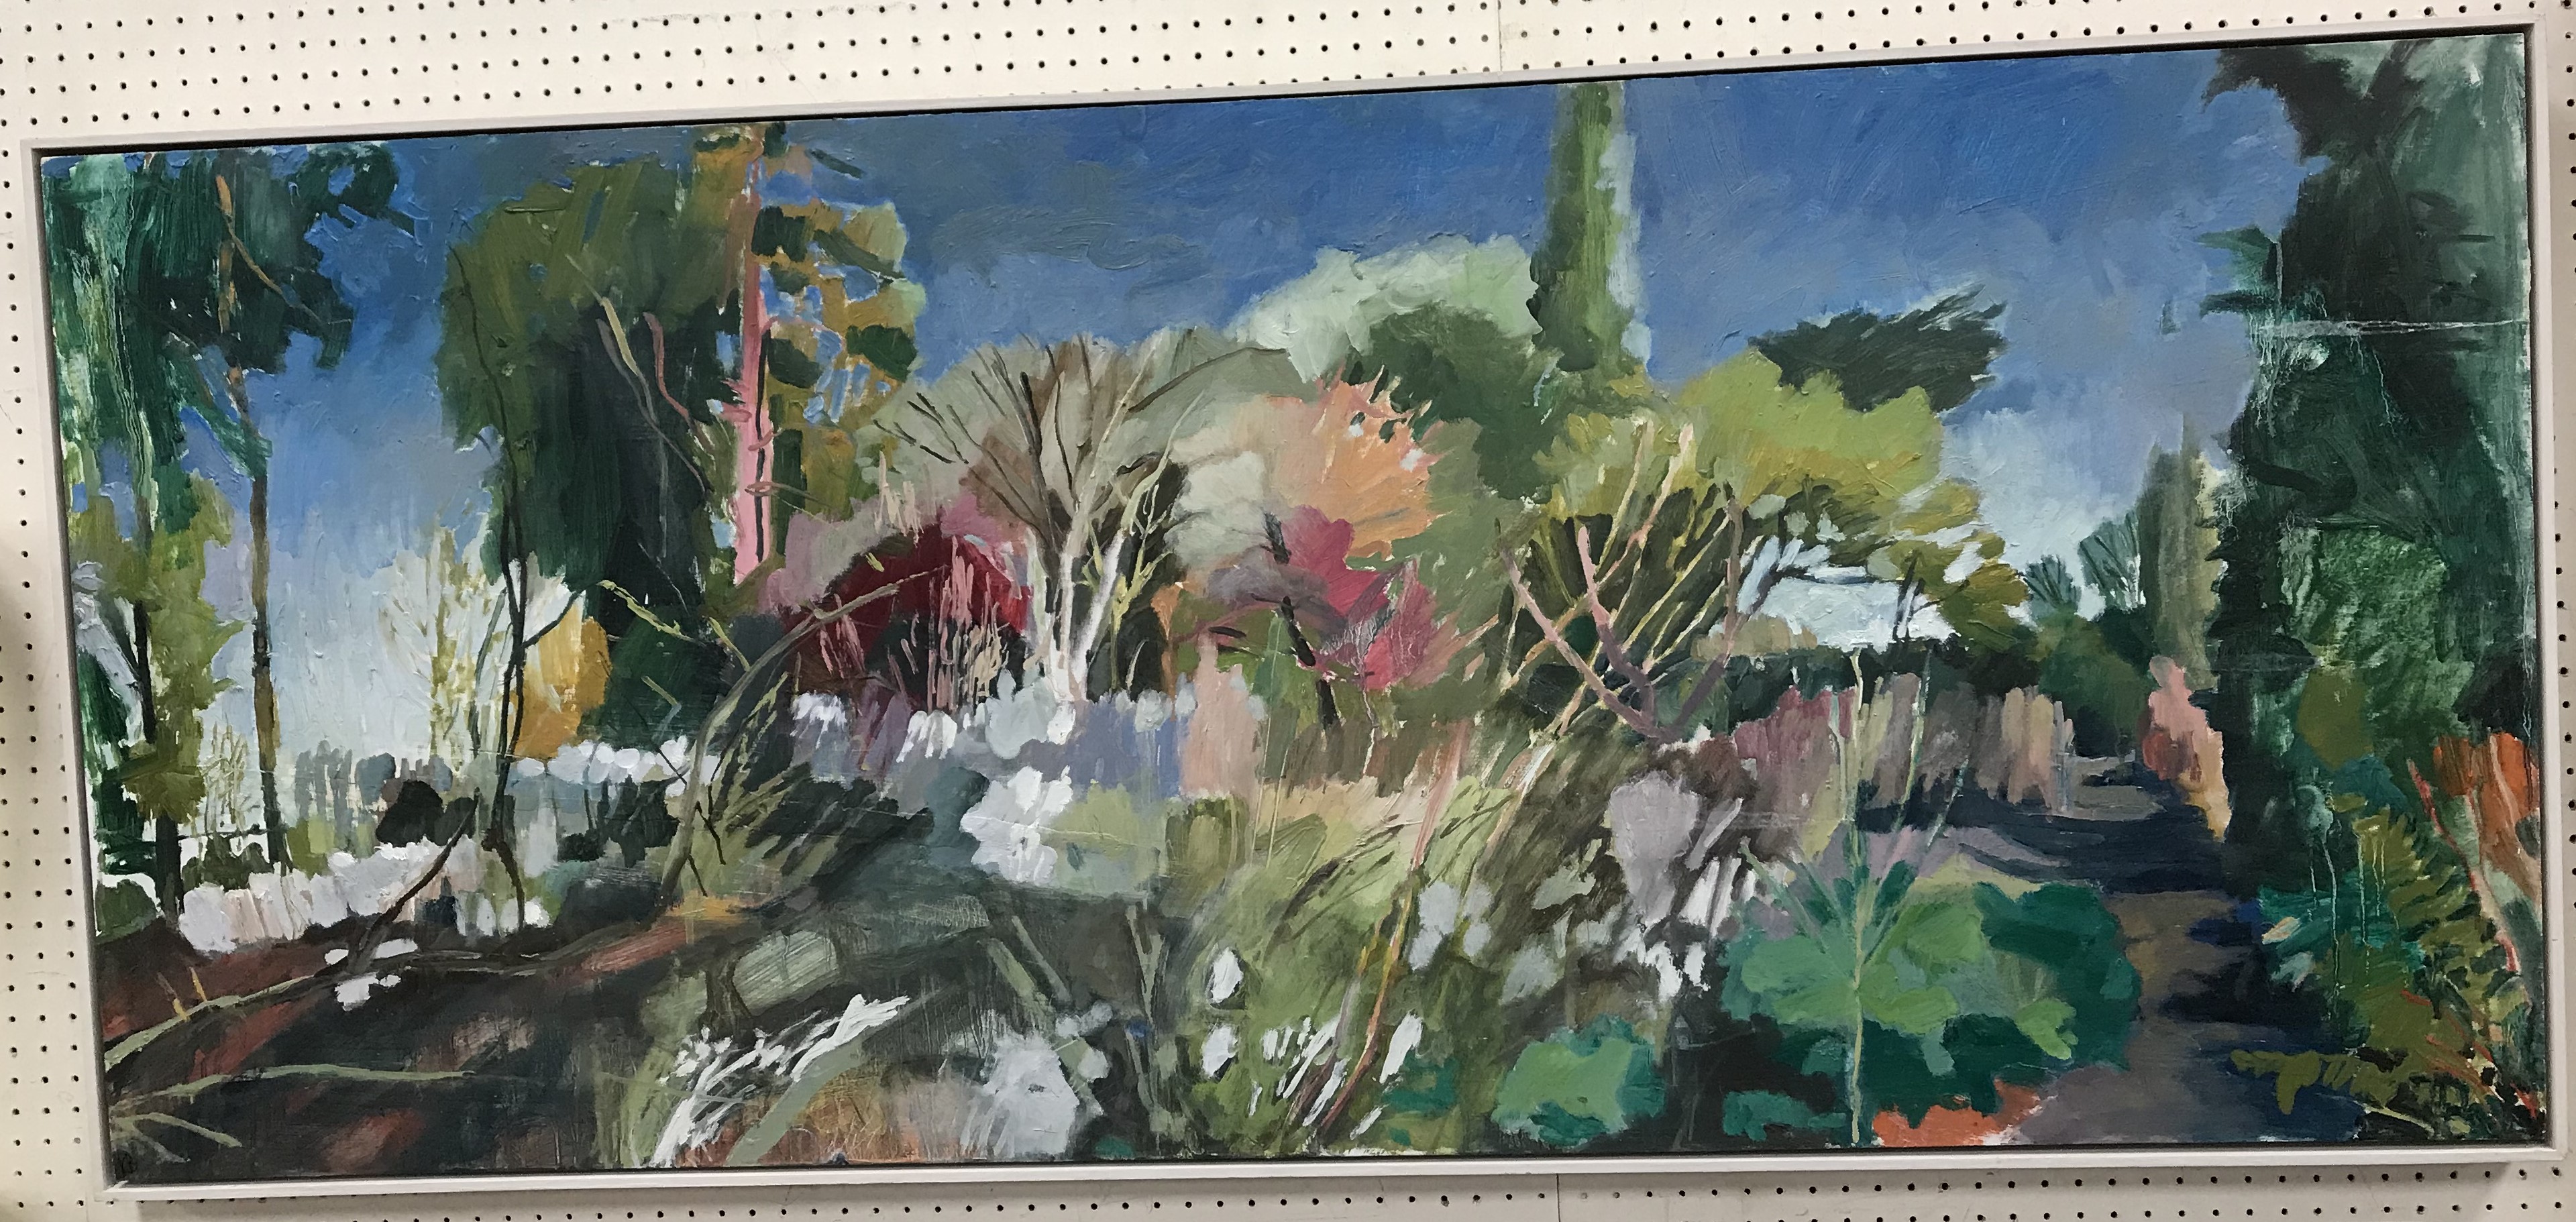 KAREN BOWERS "Hidcote", landscape study, oil on board, inscribed and dated 2014 verso,